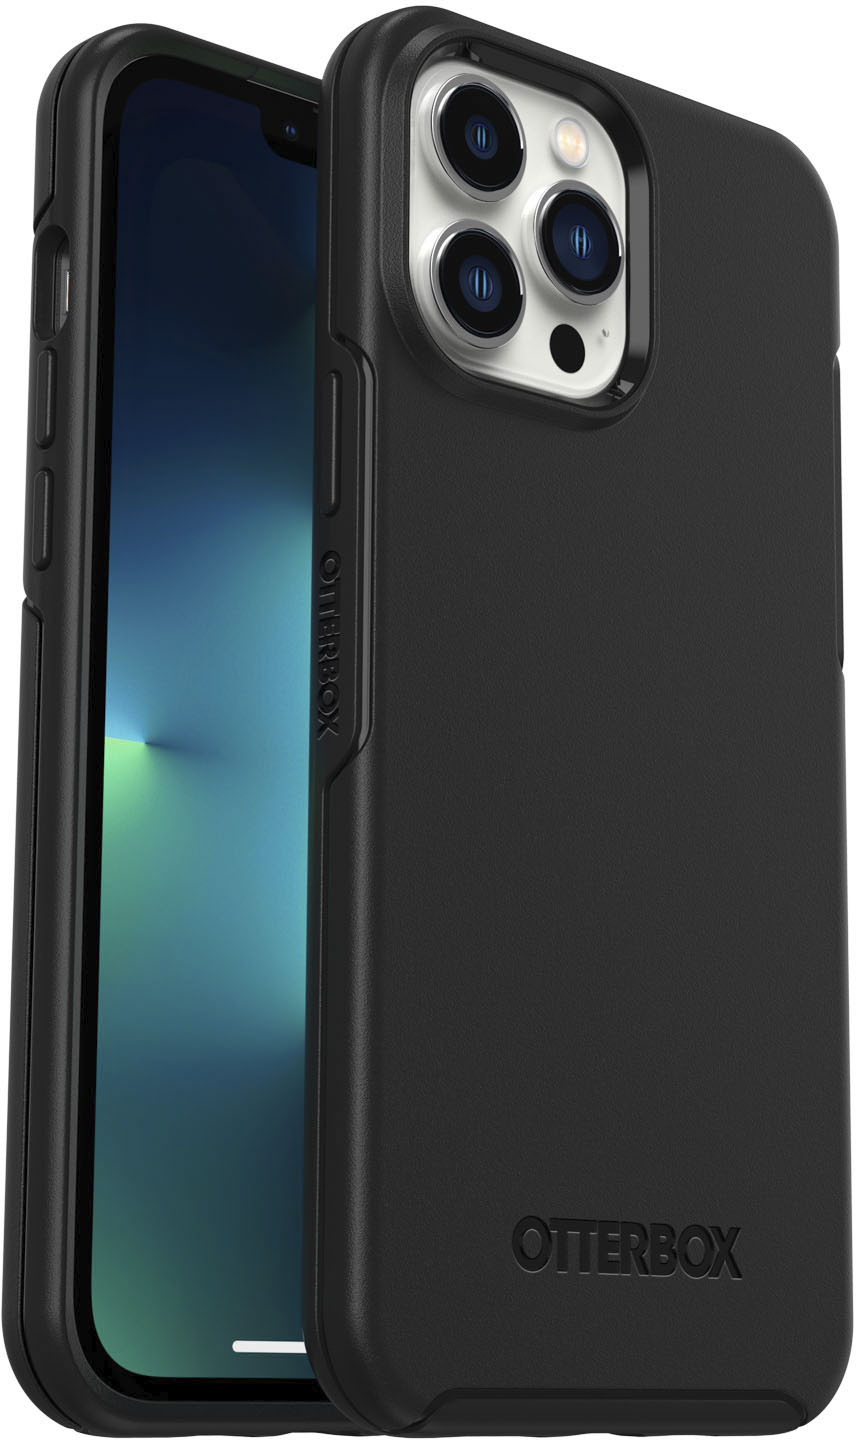 Angle View: OtterBox - Symmetry Series Hard Shell for Apple iPhone 13 Pro Max and iPhone 12 Pro Max - Black